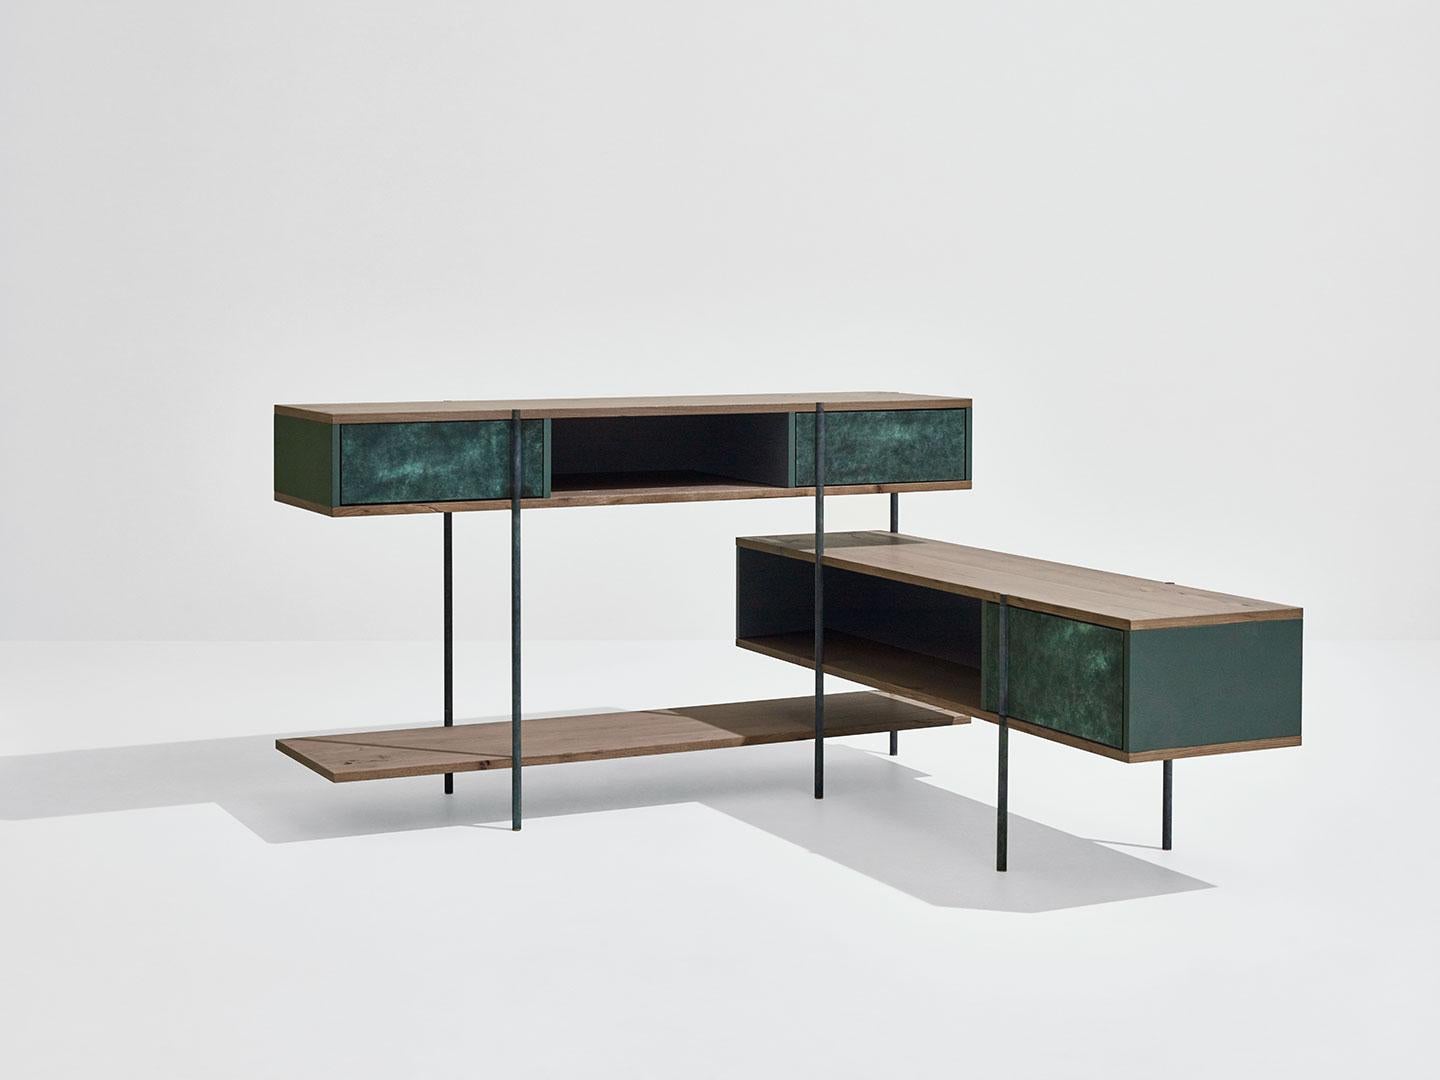 Pivot Angular console by SEM
Dimensions: W150 x D57 x H72 cm
Material:Metallic tubolar structure, Pivoting doors in surface in antique brass or patinas, Shelves in fossil elm or Canaletto walnut, Side and back panels in matt painted